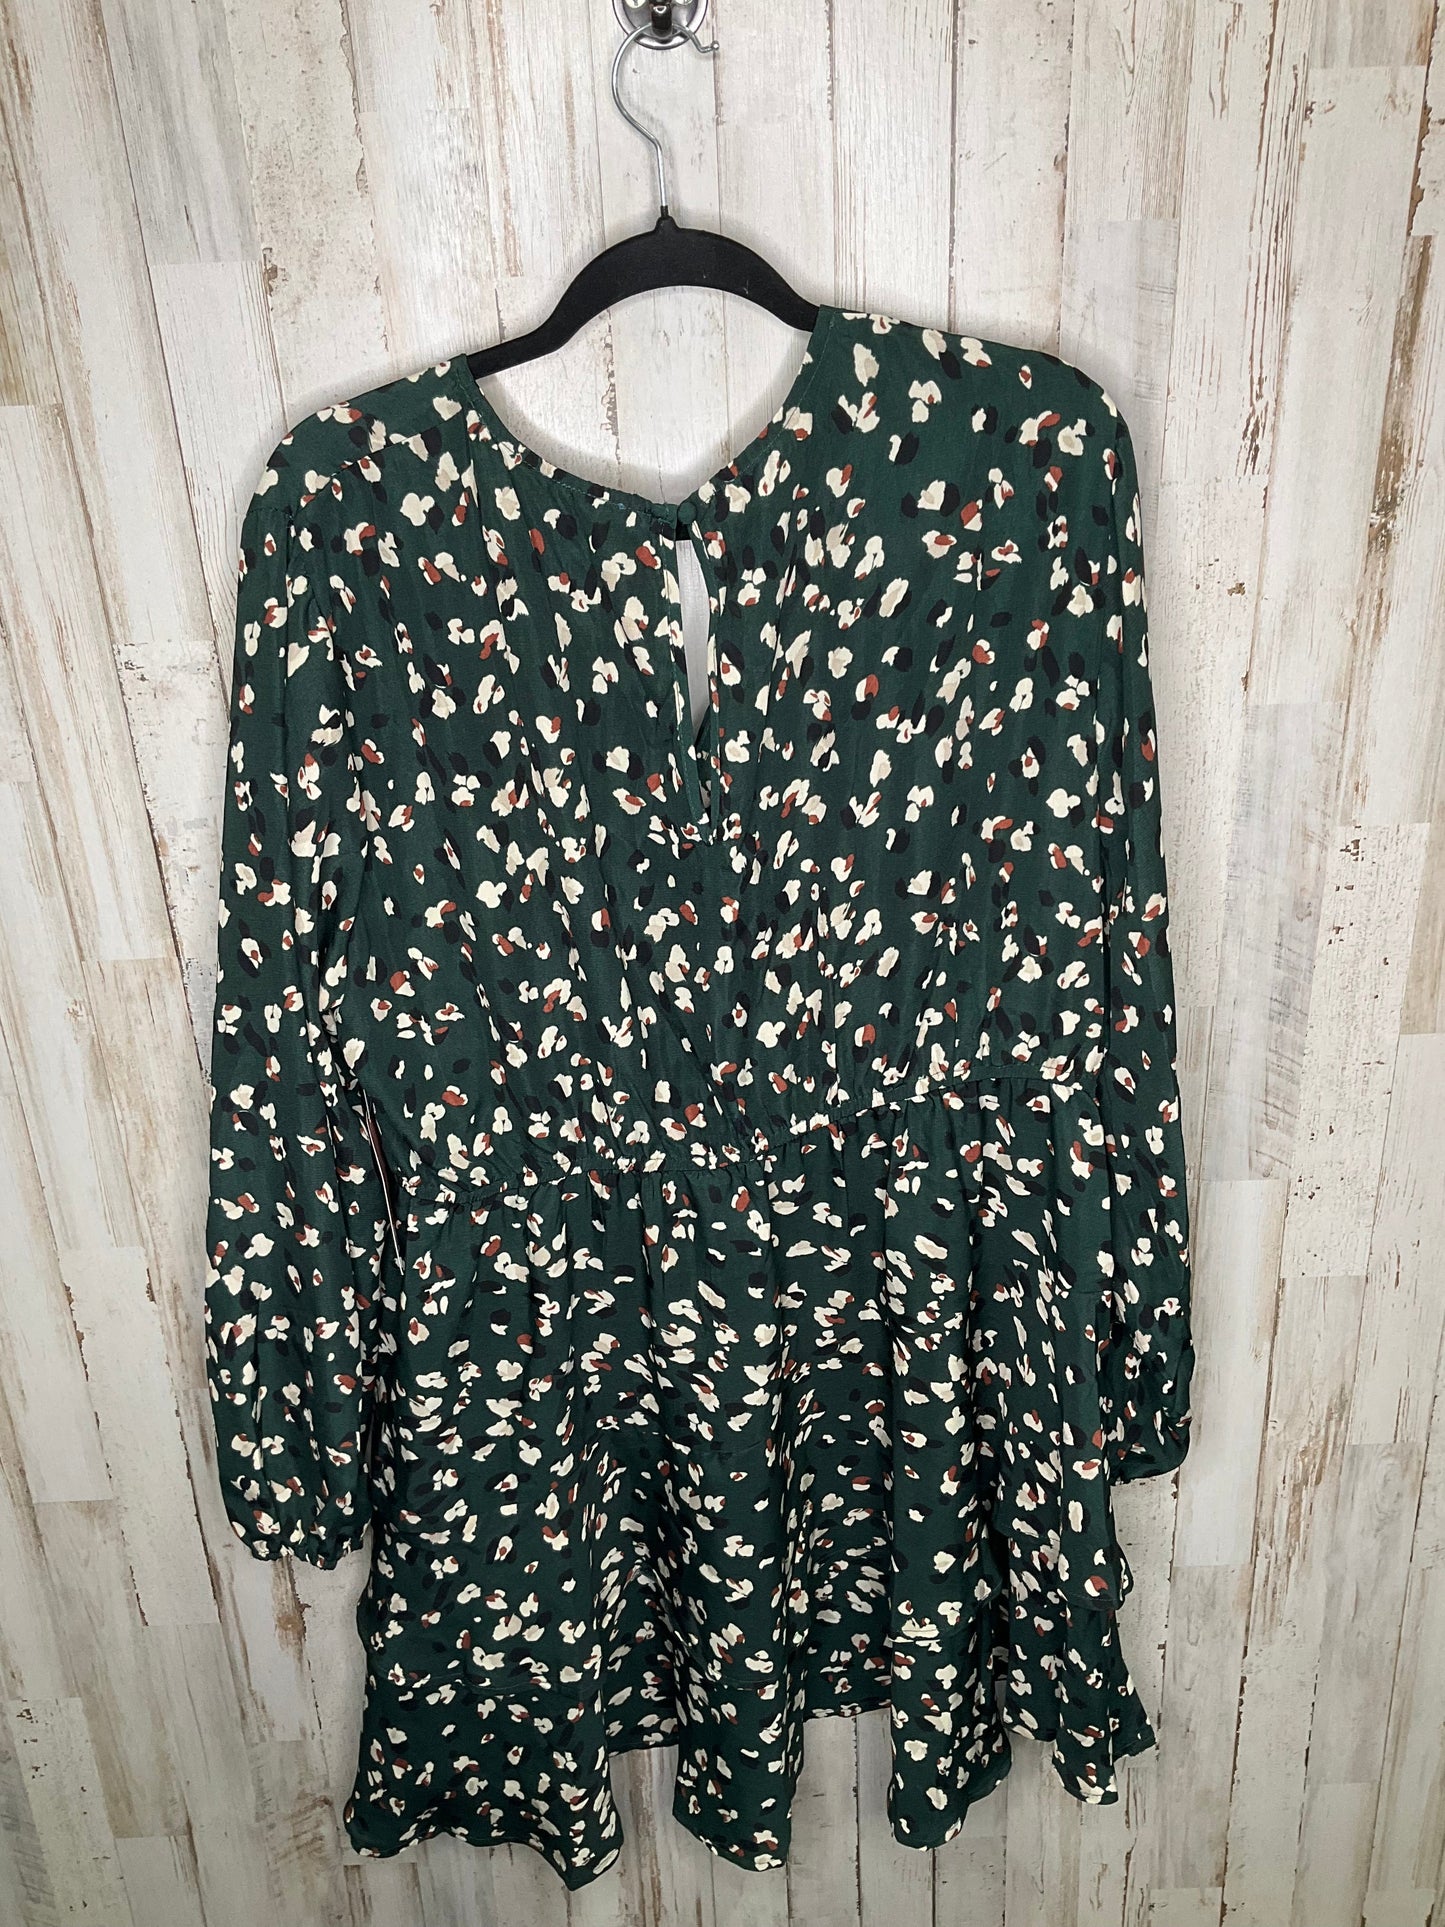 Green Dress Casual Short Altard State, Size 2x